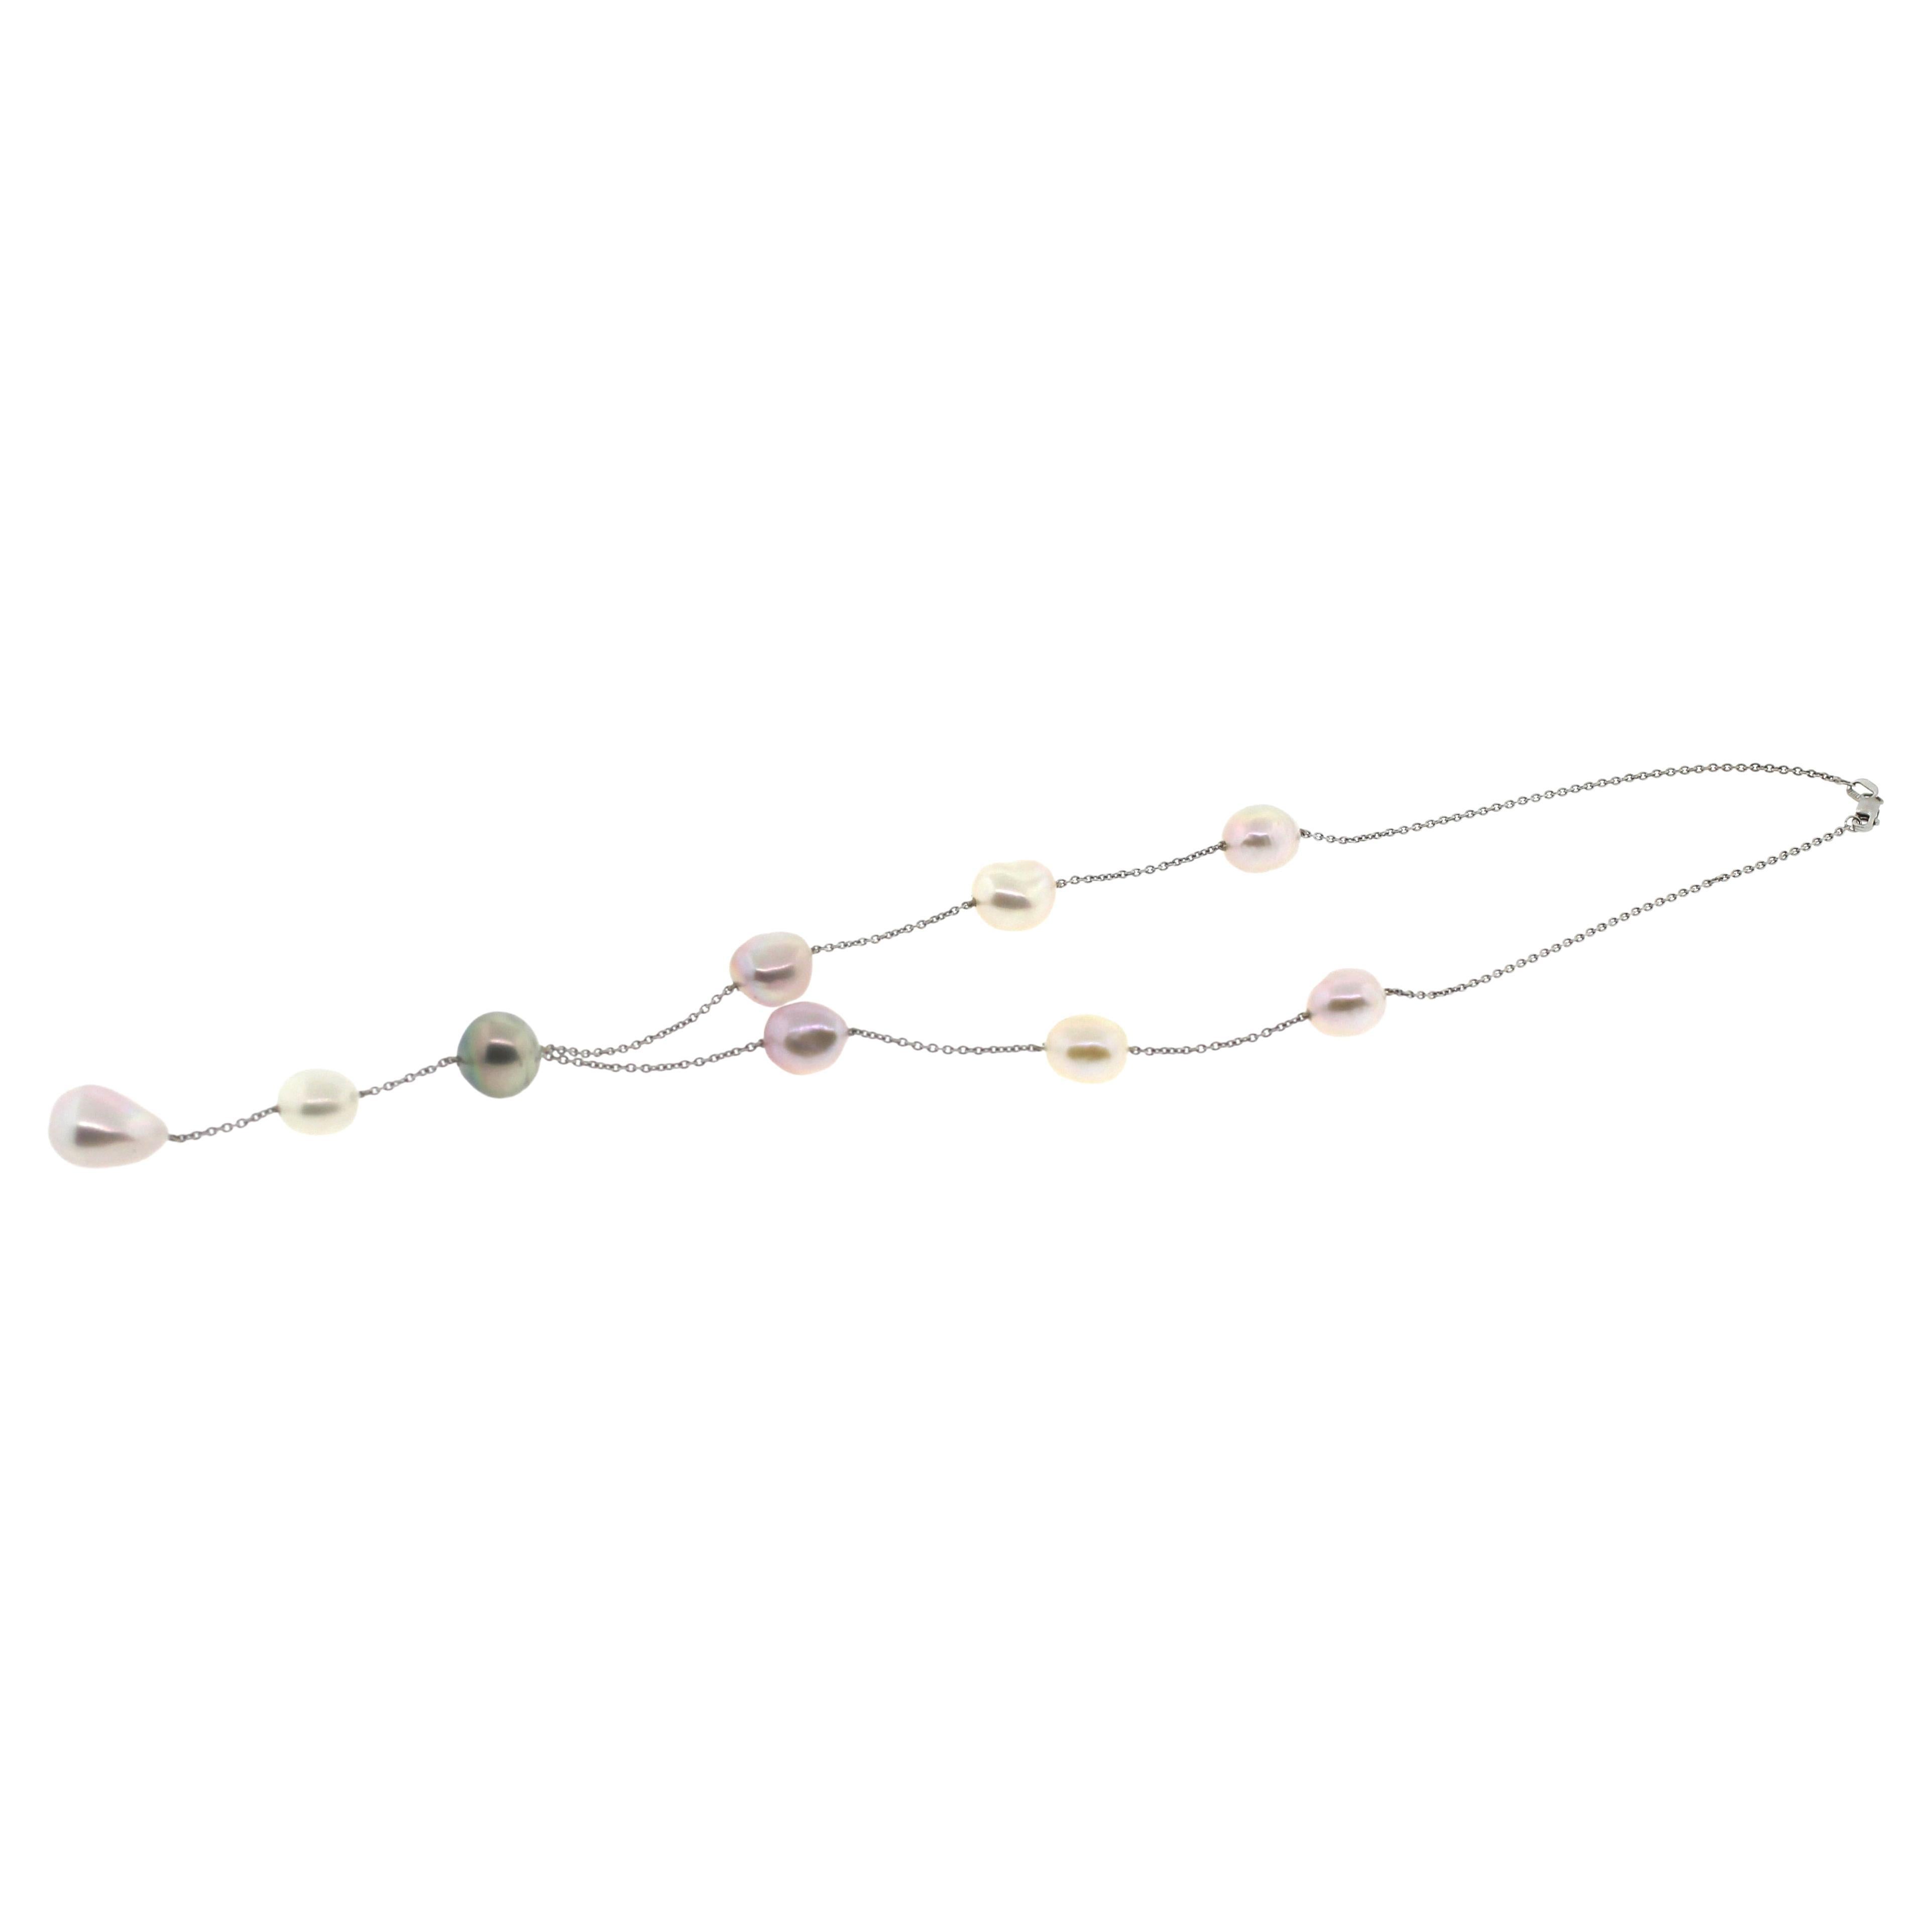 Hakimoto 18K White Gold Chain With Tahiti and 8 Baroque Pearl Necklace 1